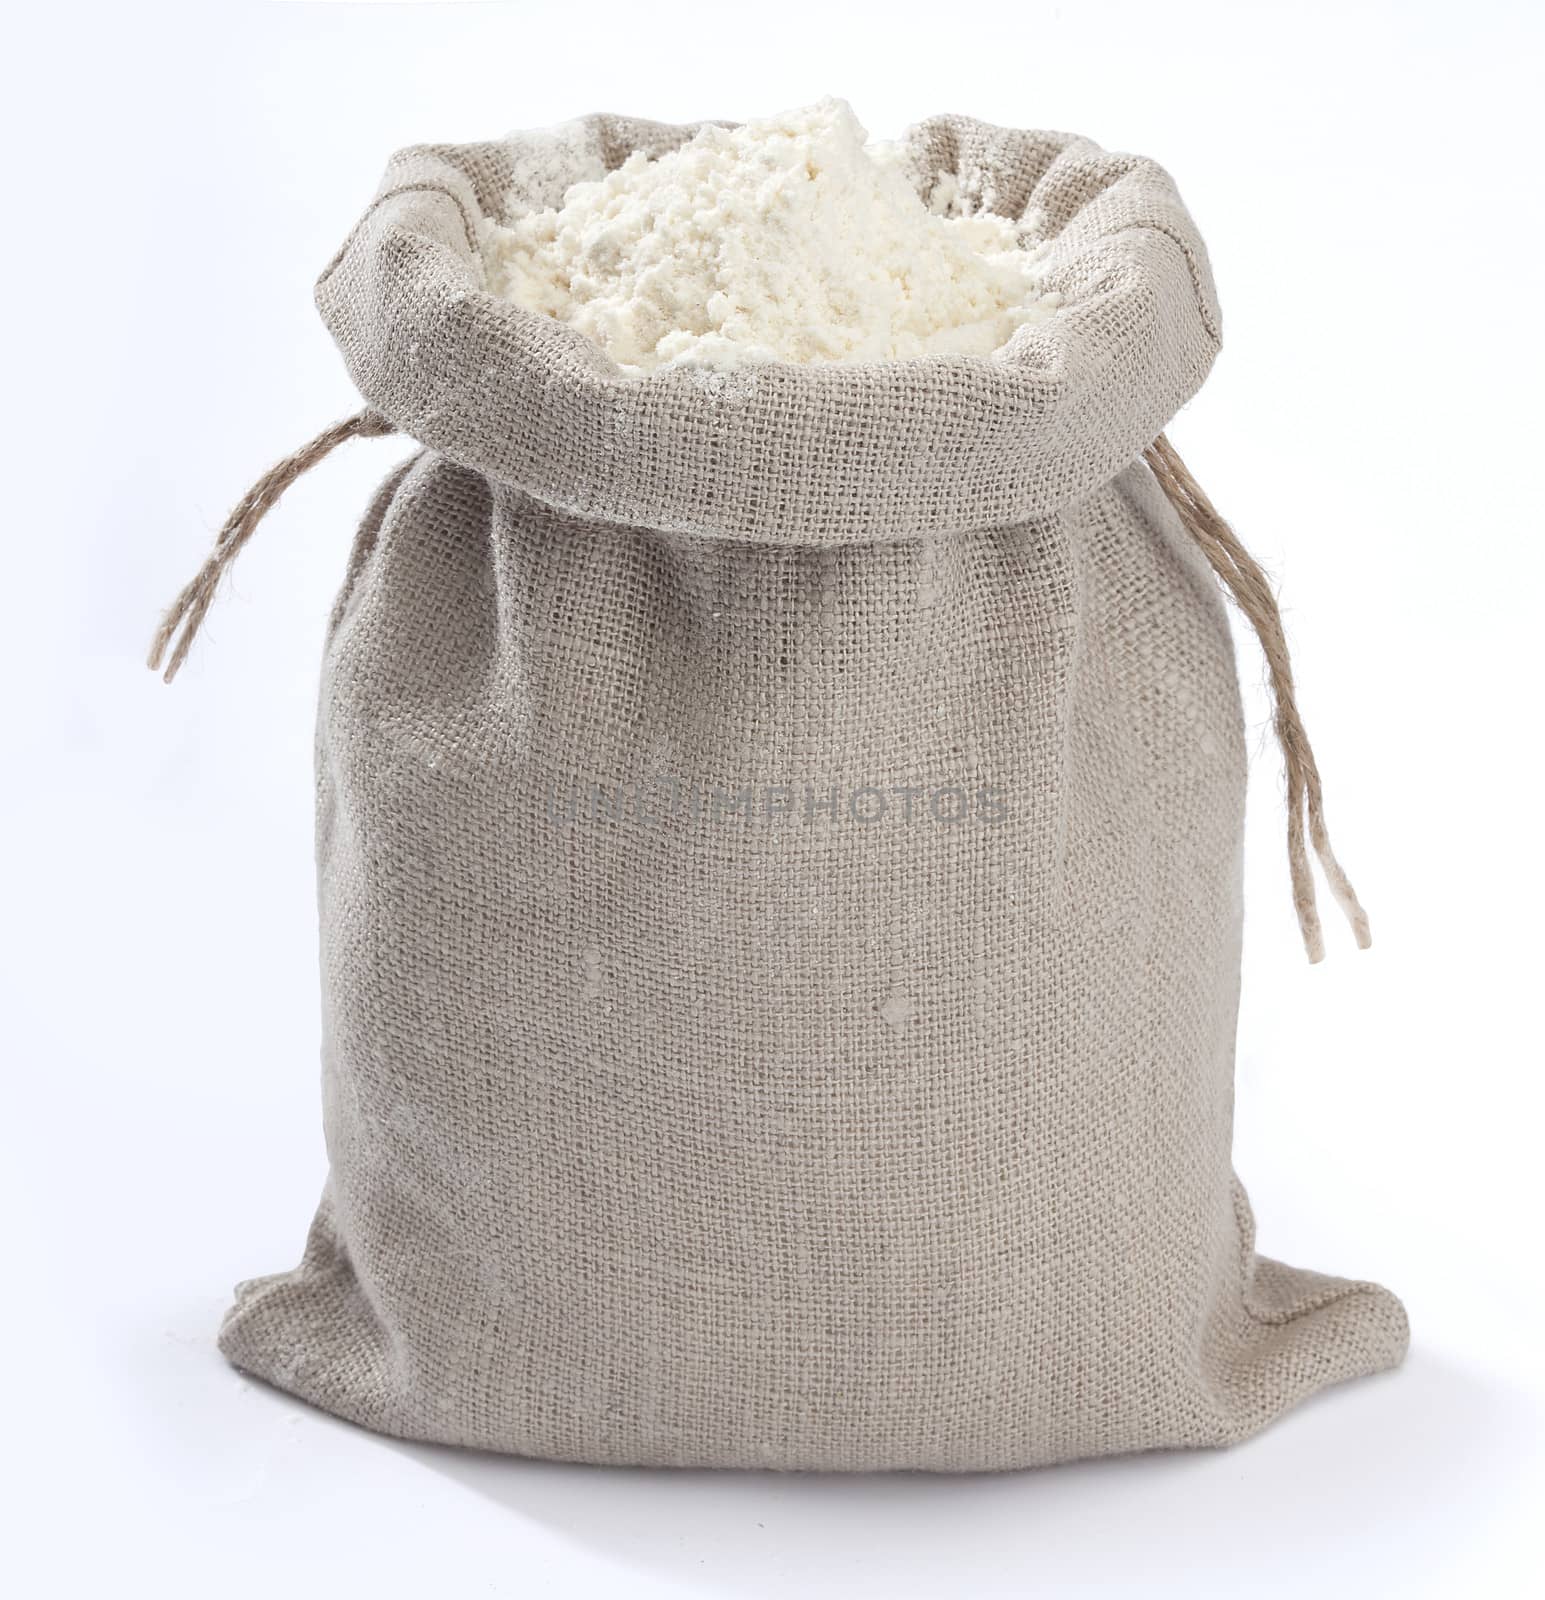 Isolated small sack with white flour on the white background